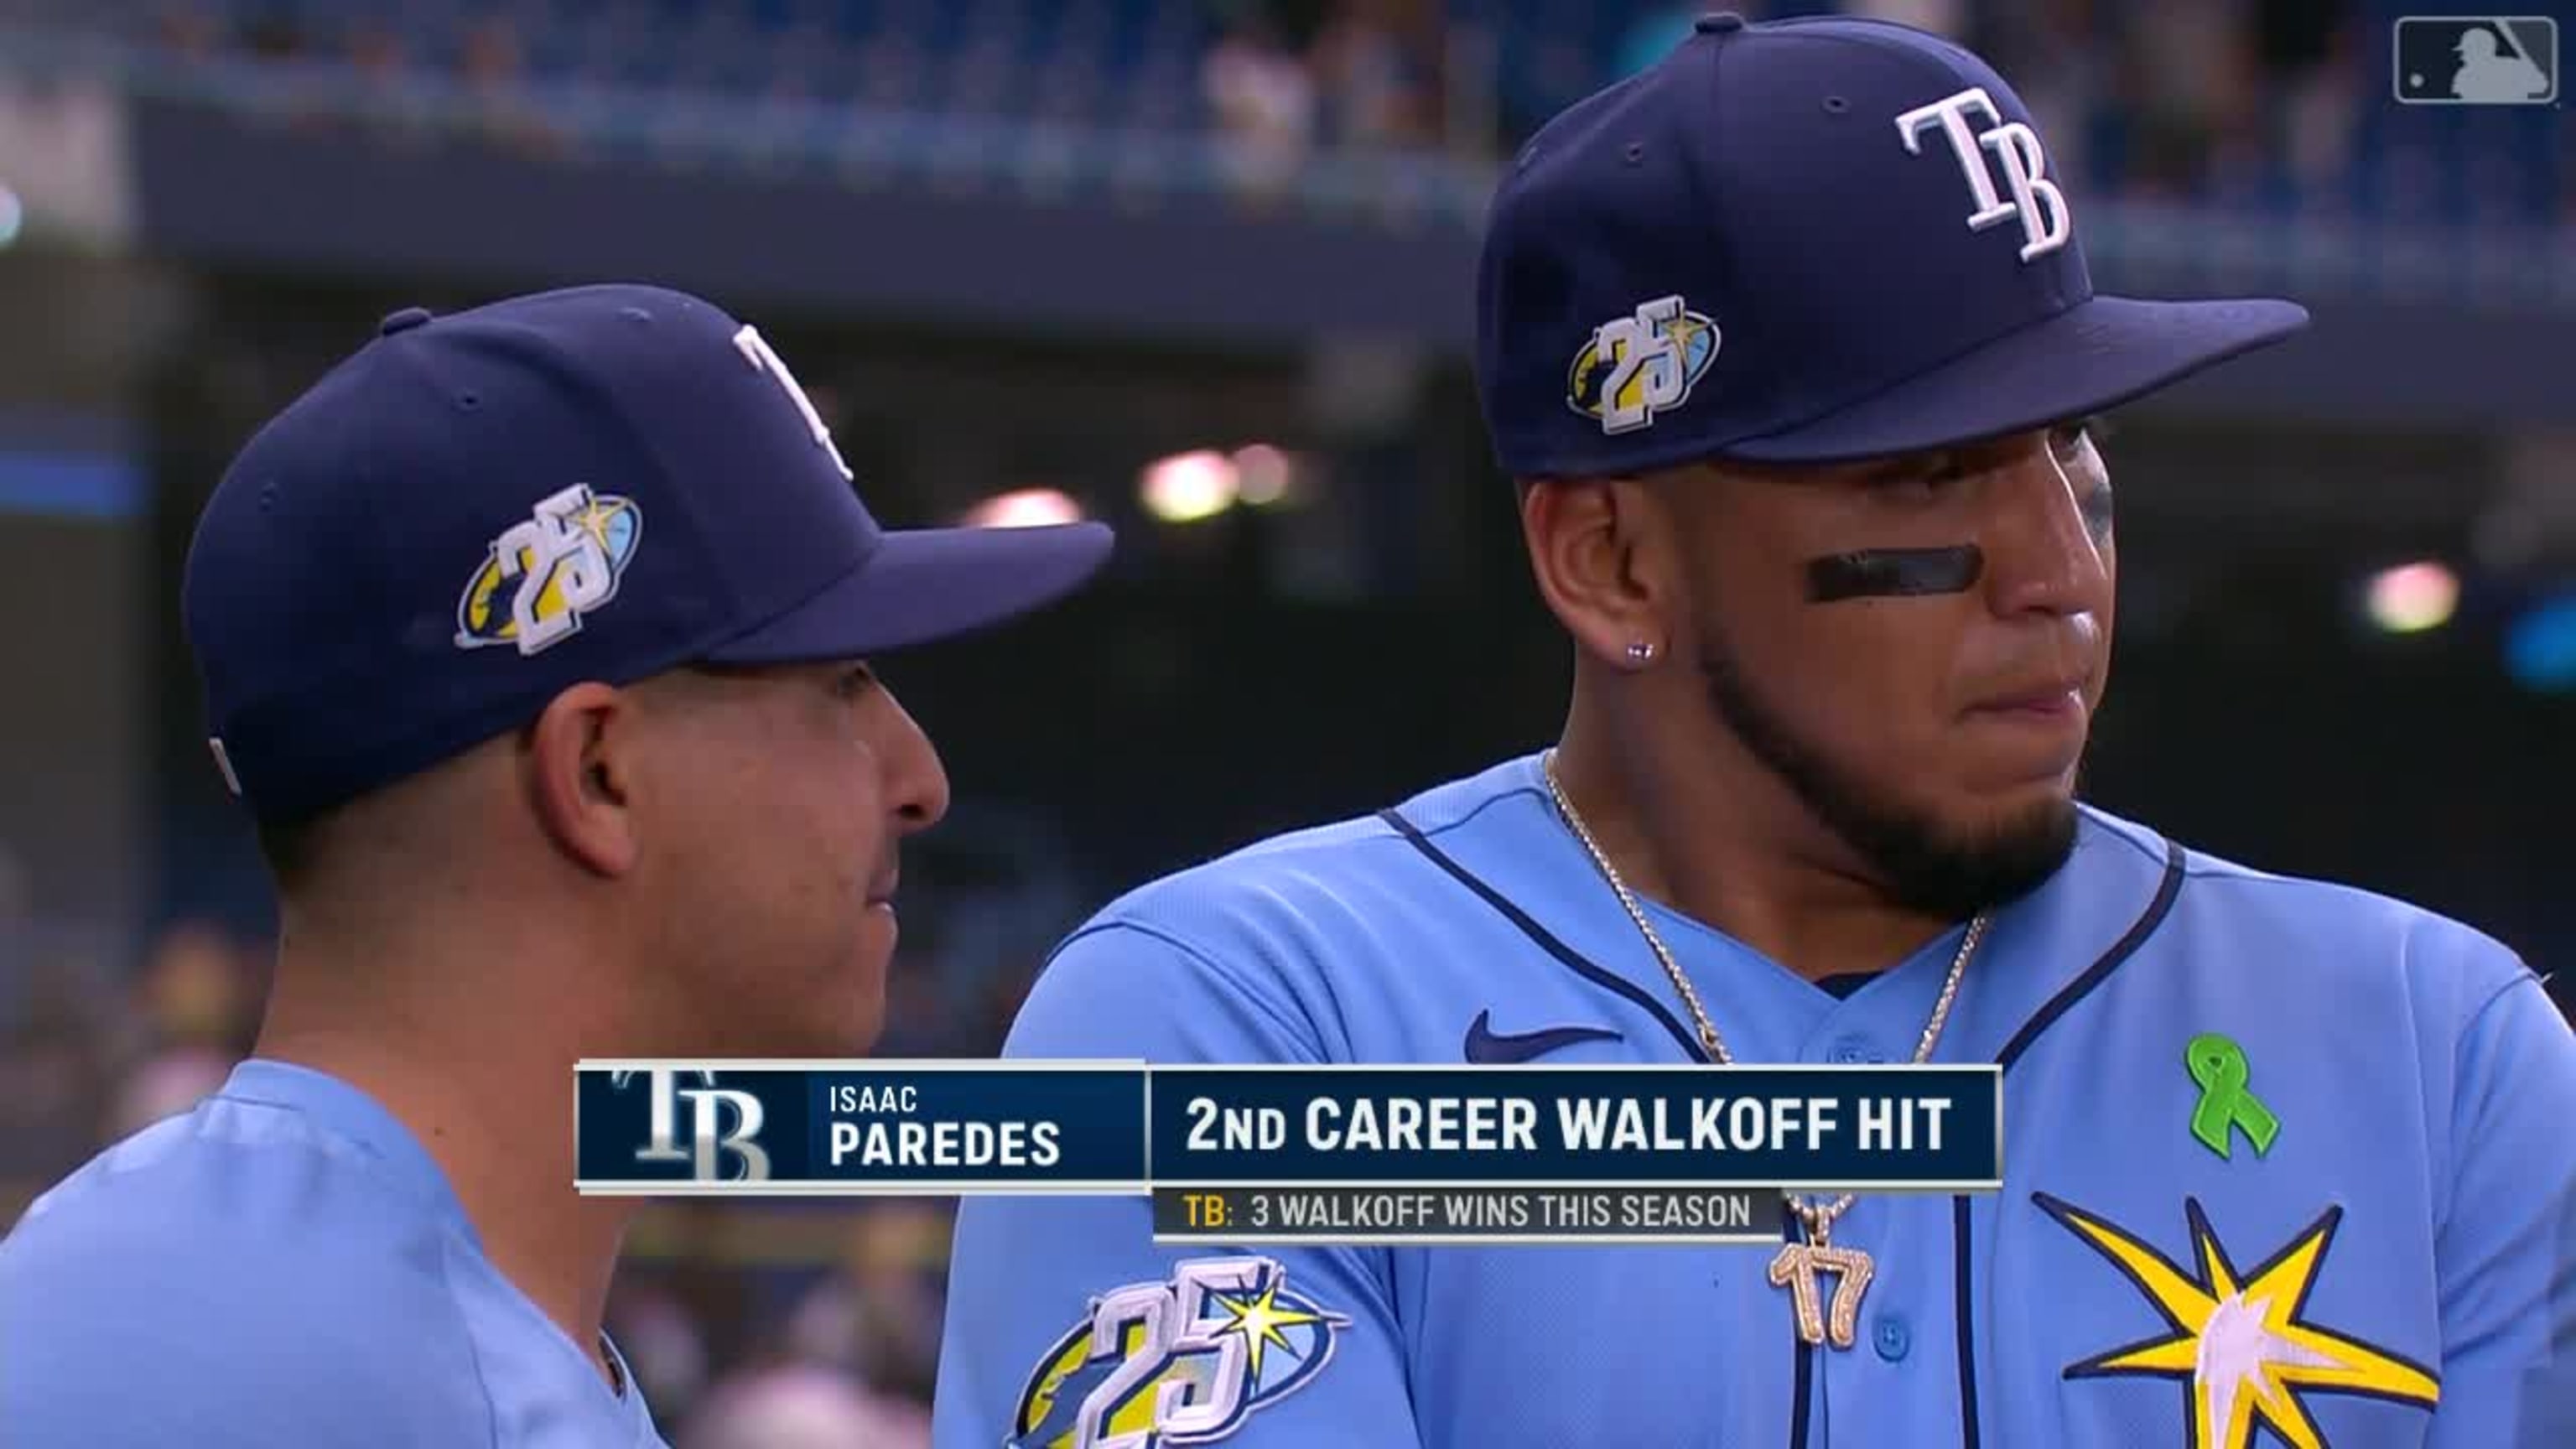 Rays fall to Yankees despite another Isaac Paredes HR